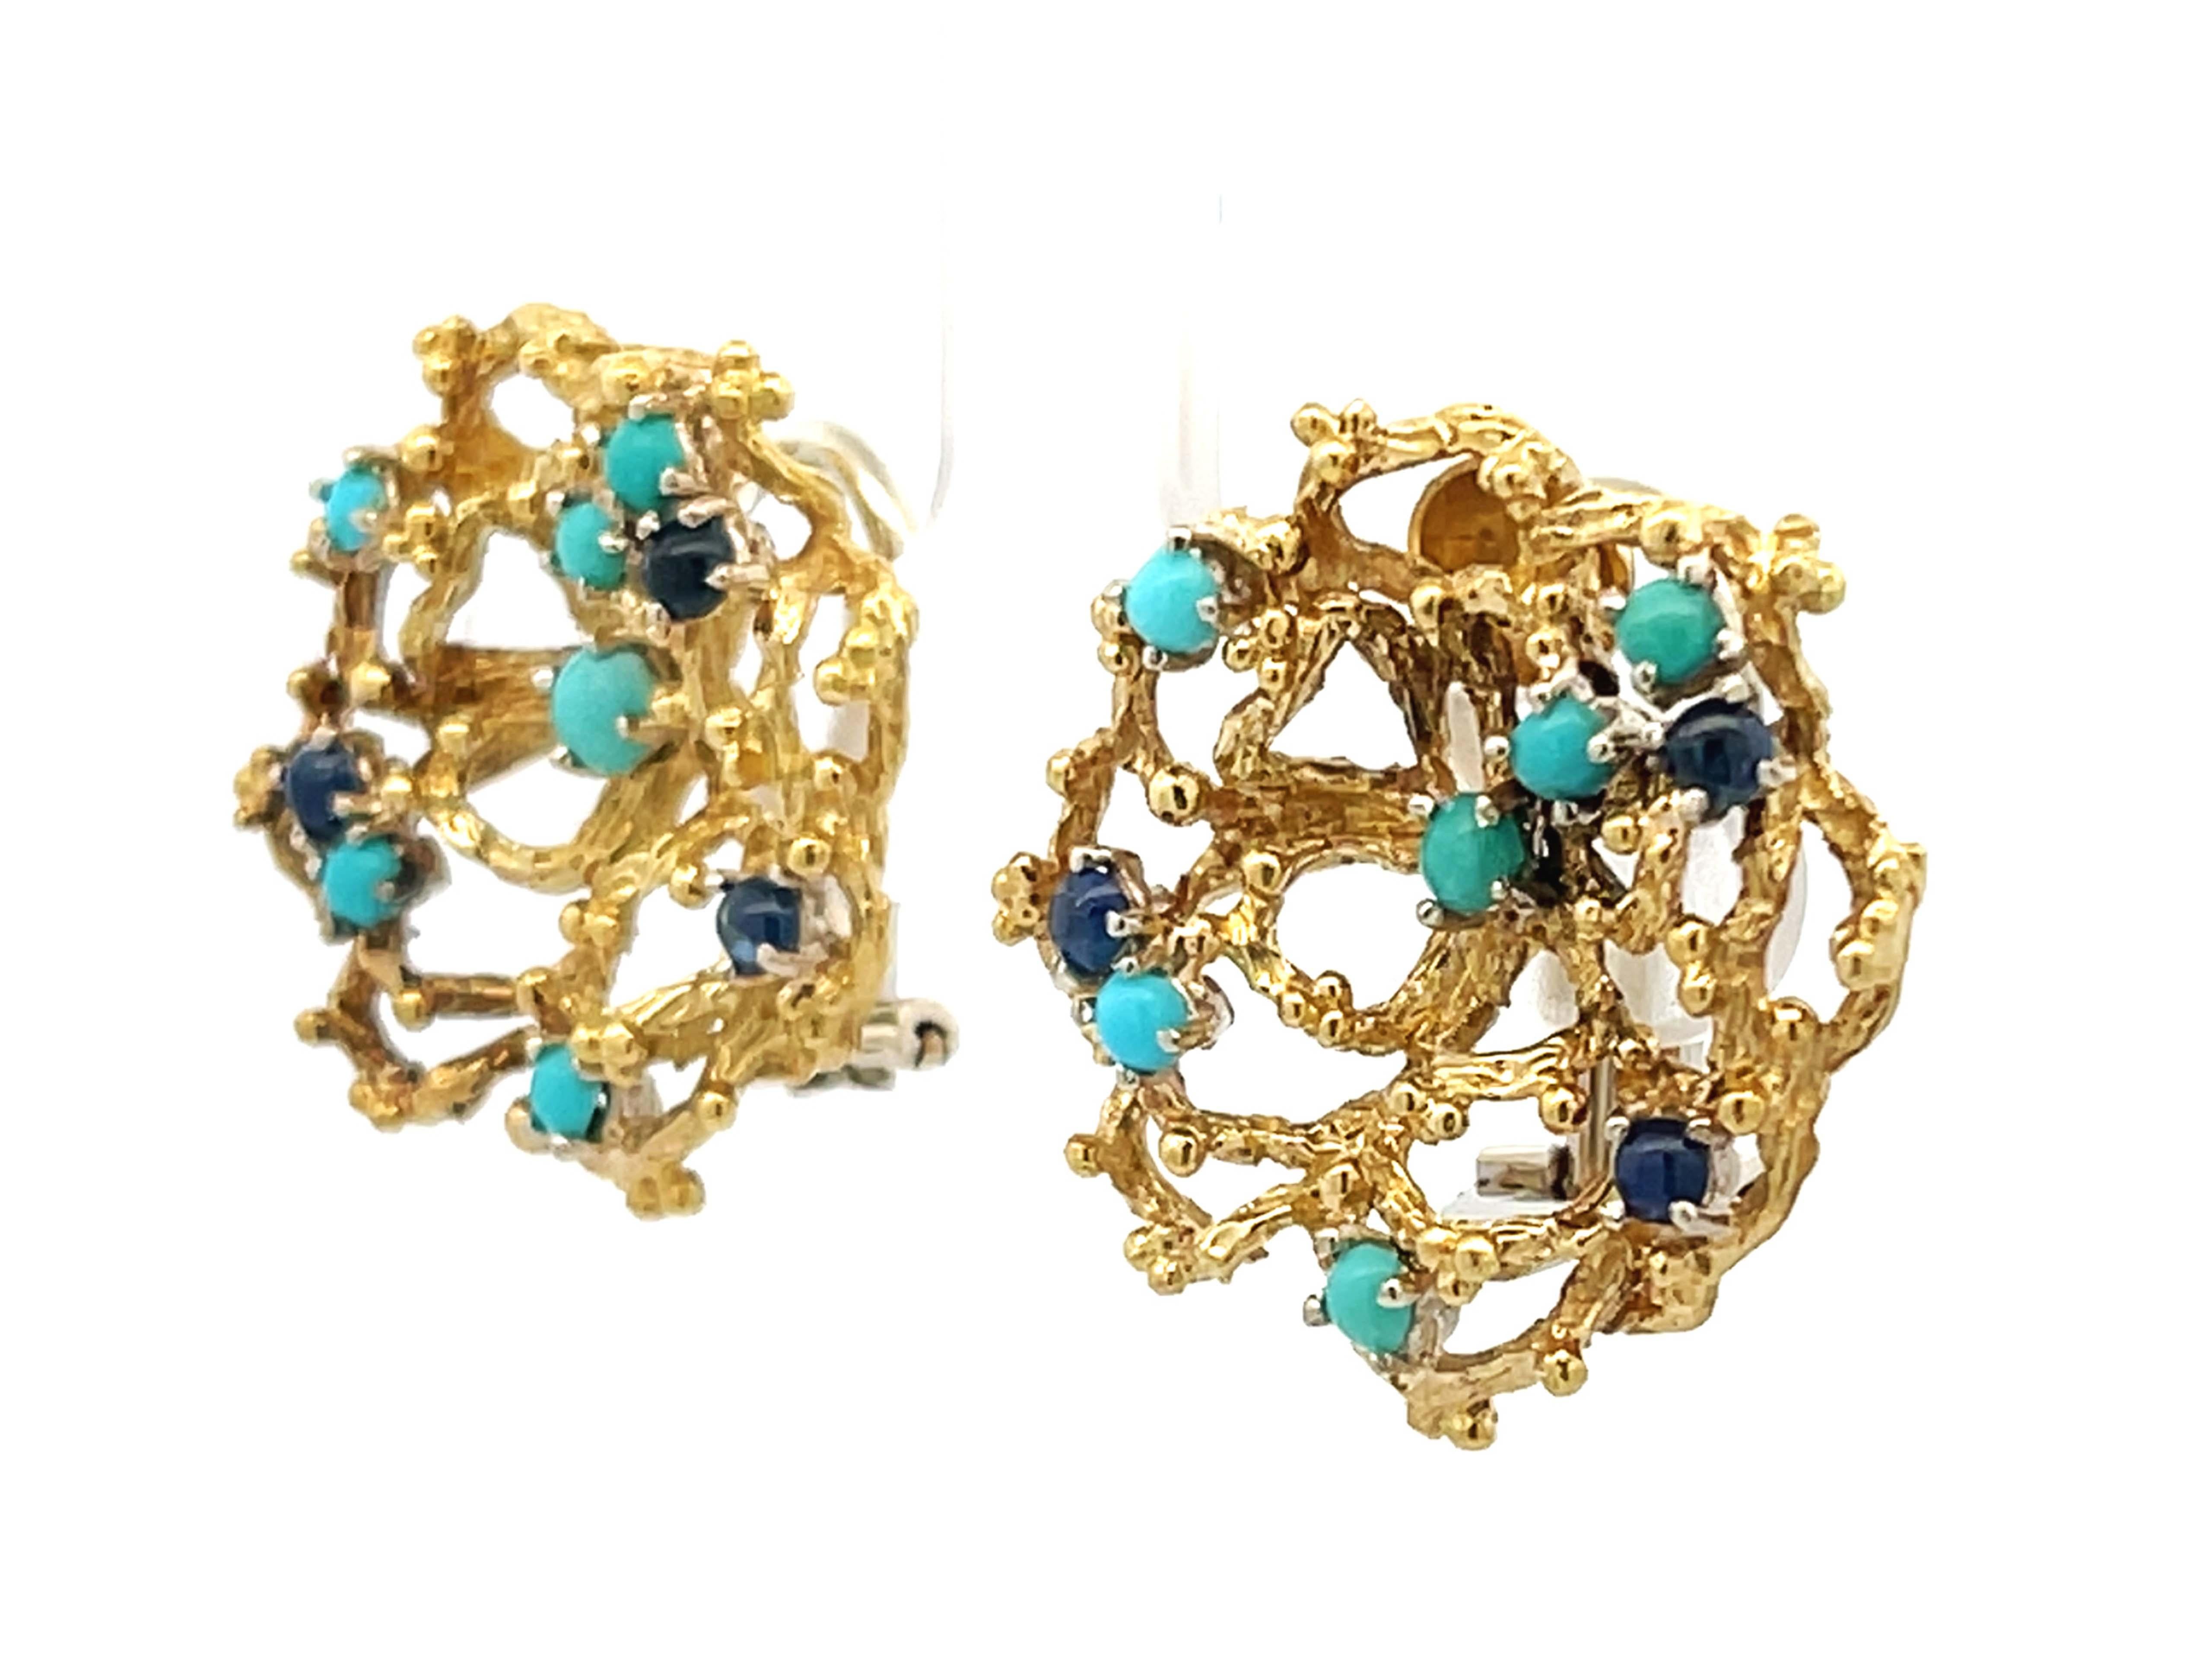 Wavy Flower Earrings with Cabochon Sapphires and Turquoises in 18k Yellow Gold In Excellent Condition For Sale In Honolulu, HI